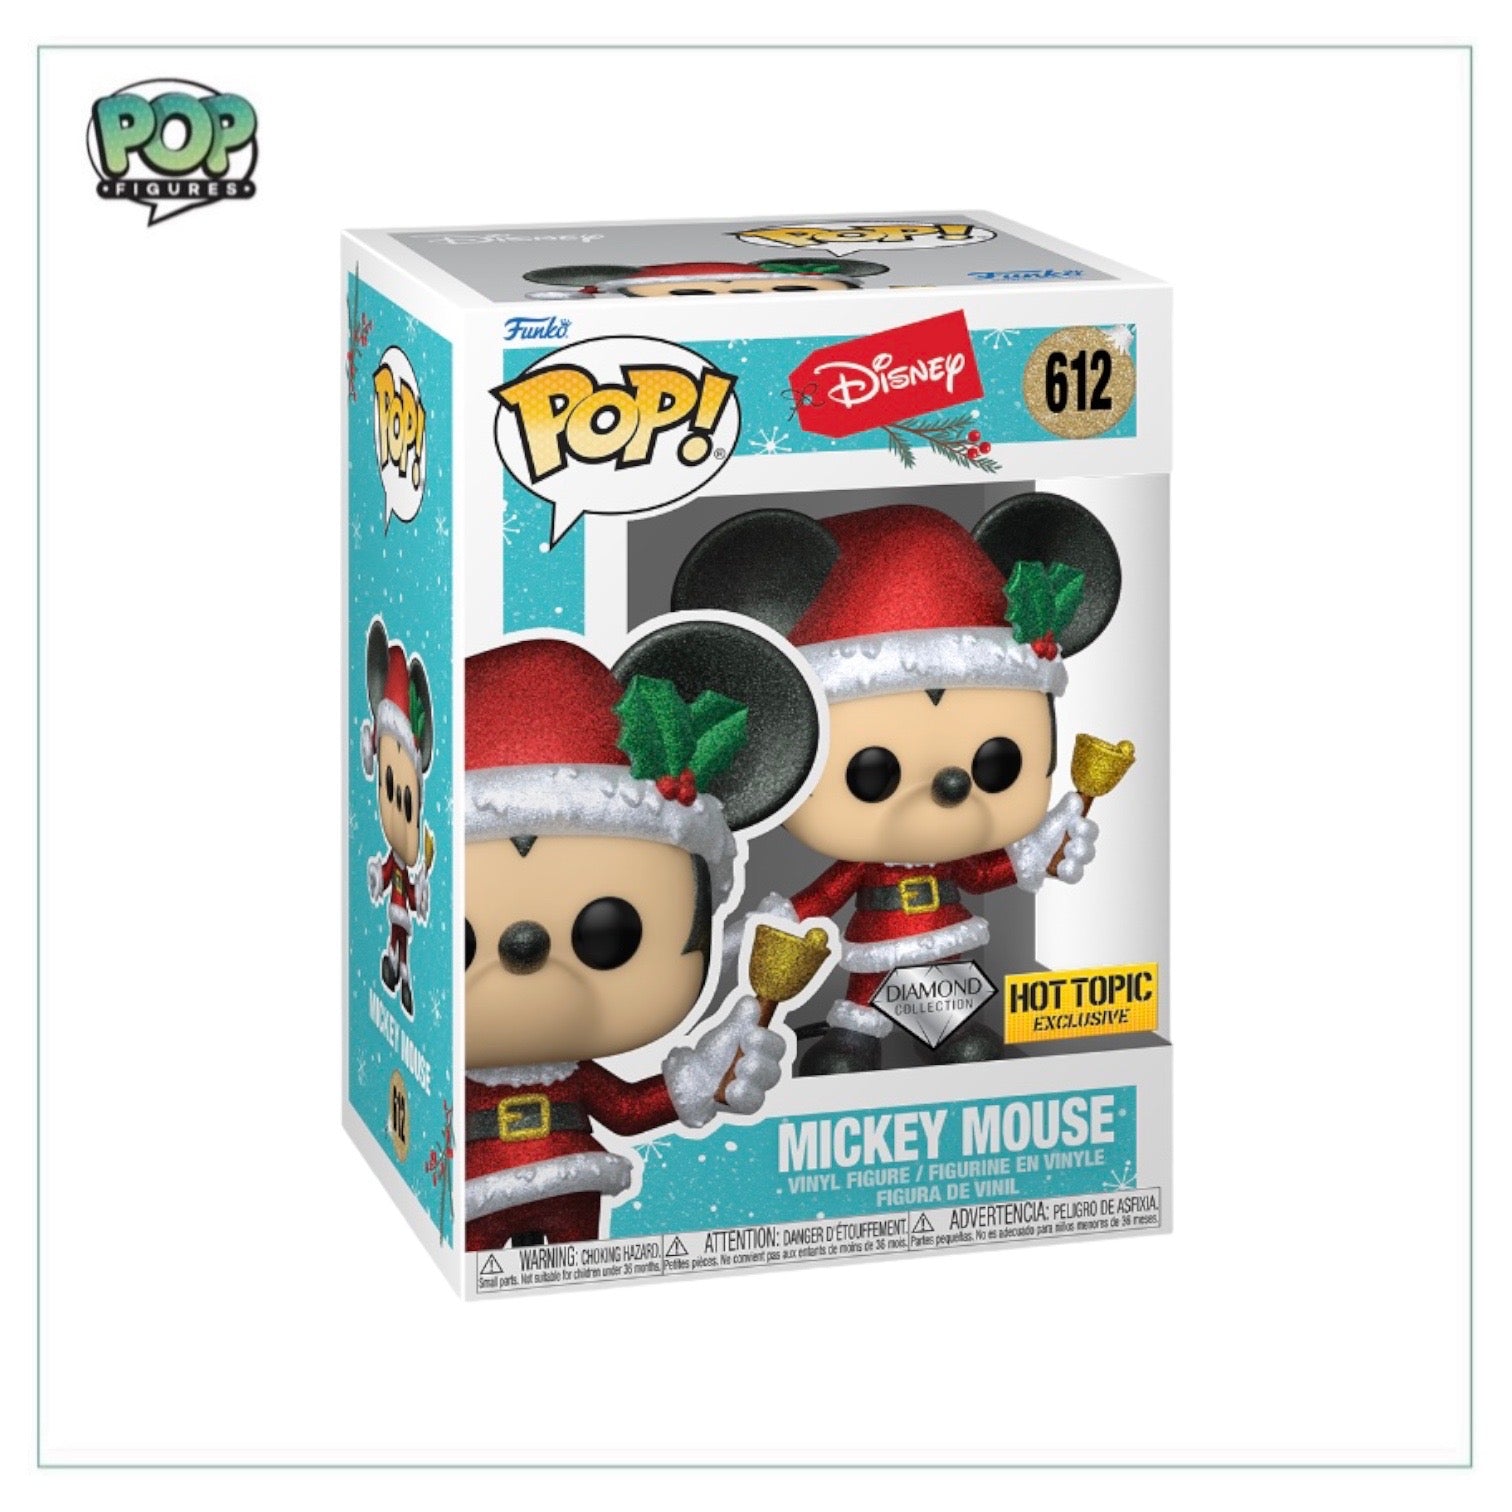 Mickey Mouse #612 (Diamond Collection) Funko Pop! - Disney - Hot Topic Exclusive